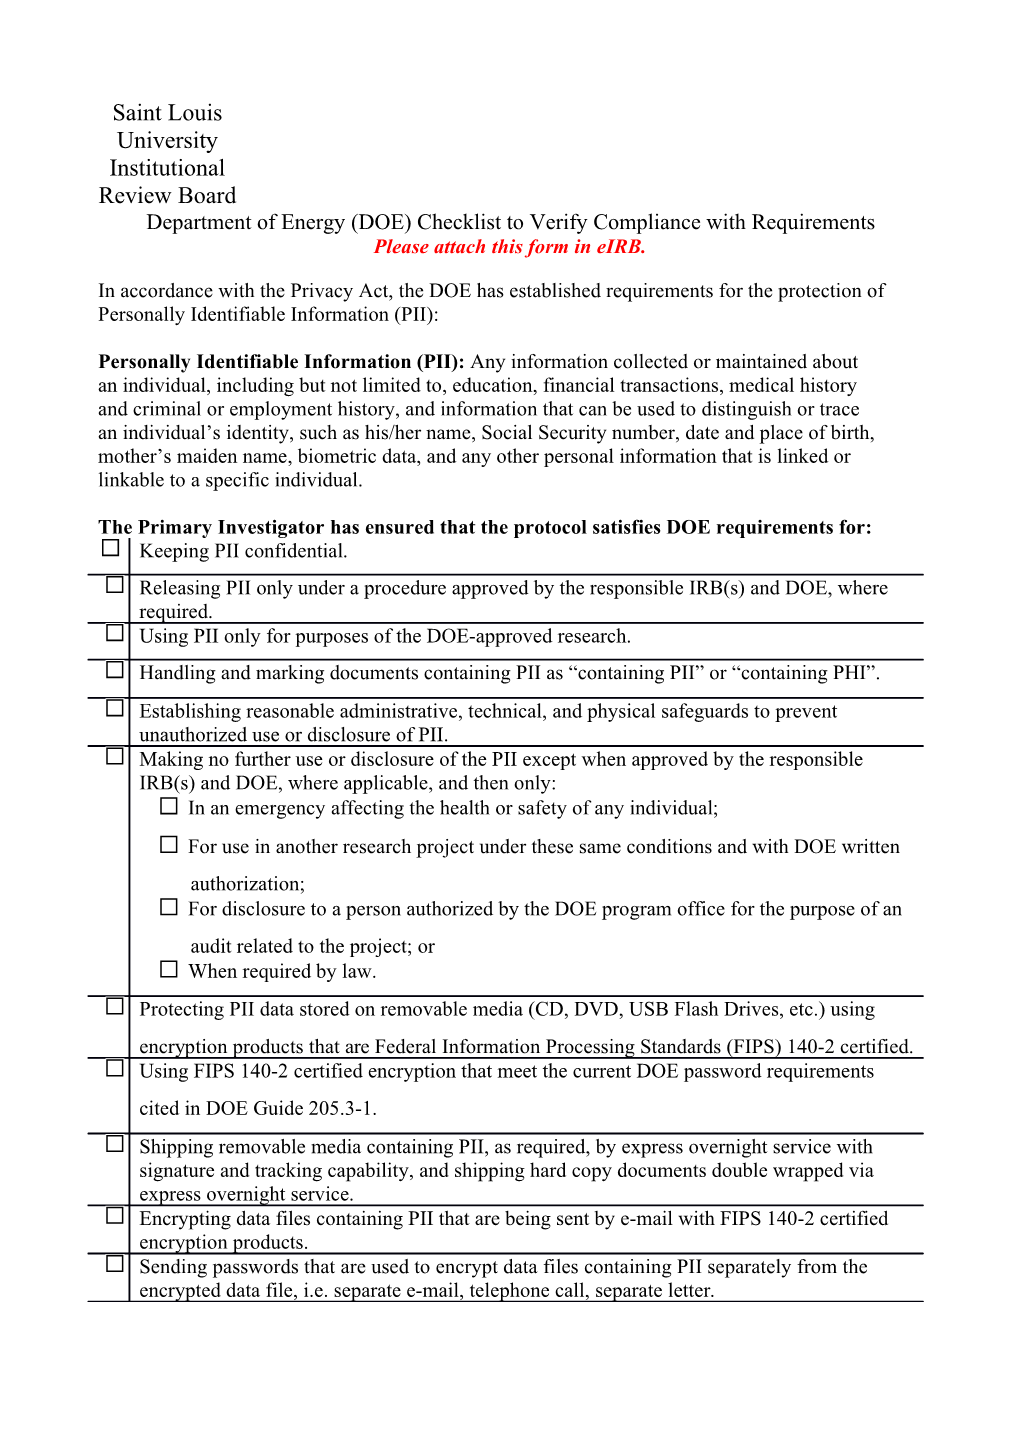 Checklist for Irbs to Use in Verifying That HS Research Protocols Are in Compliance With